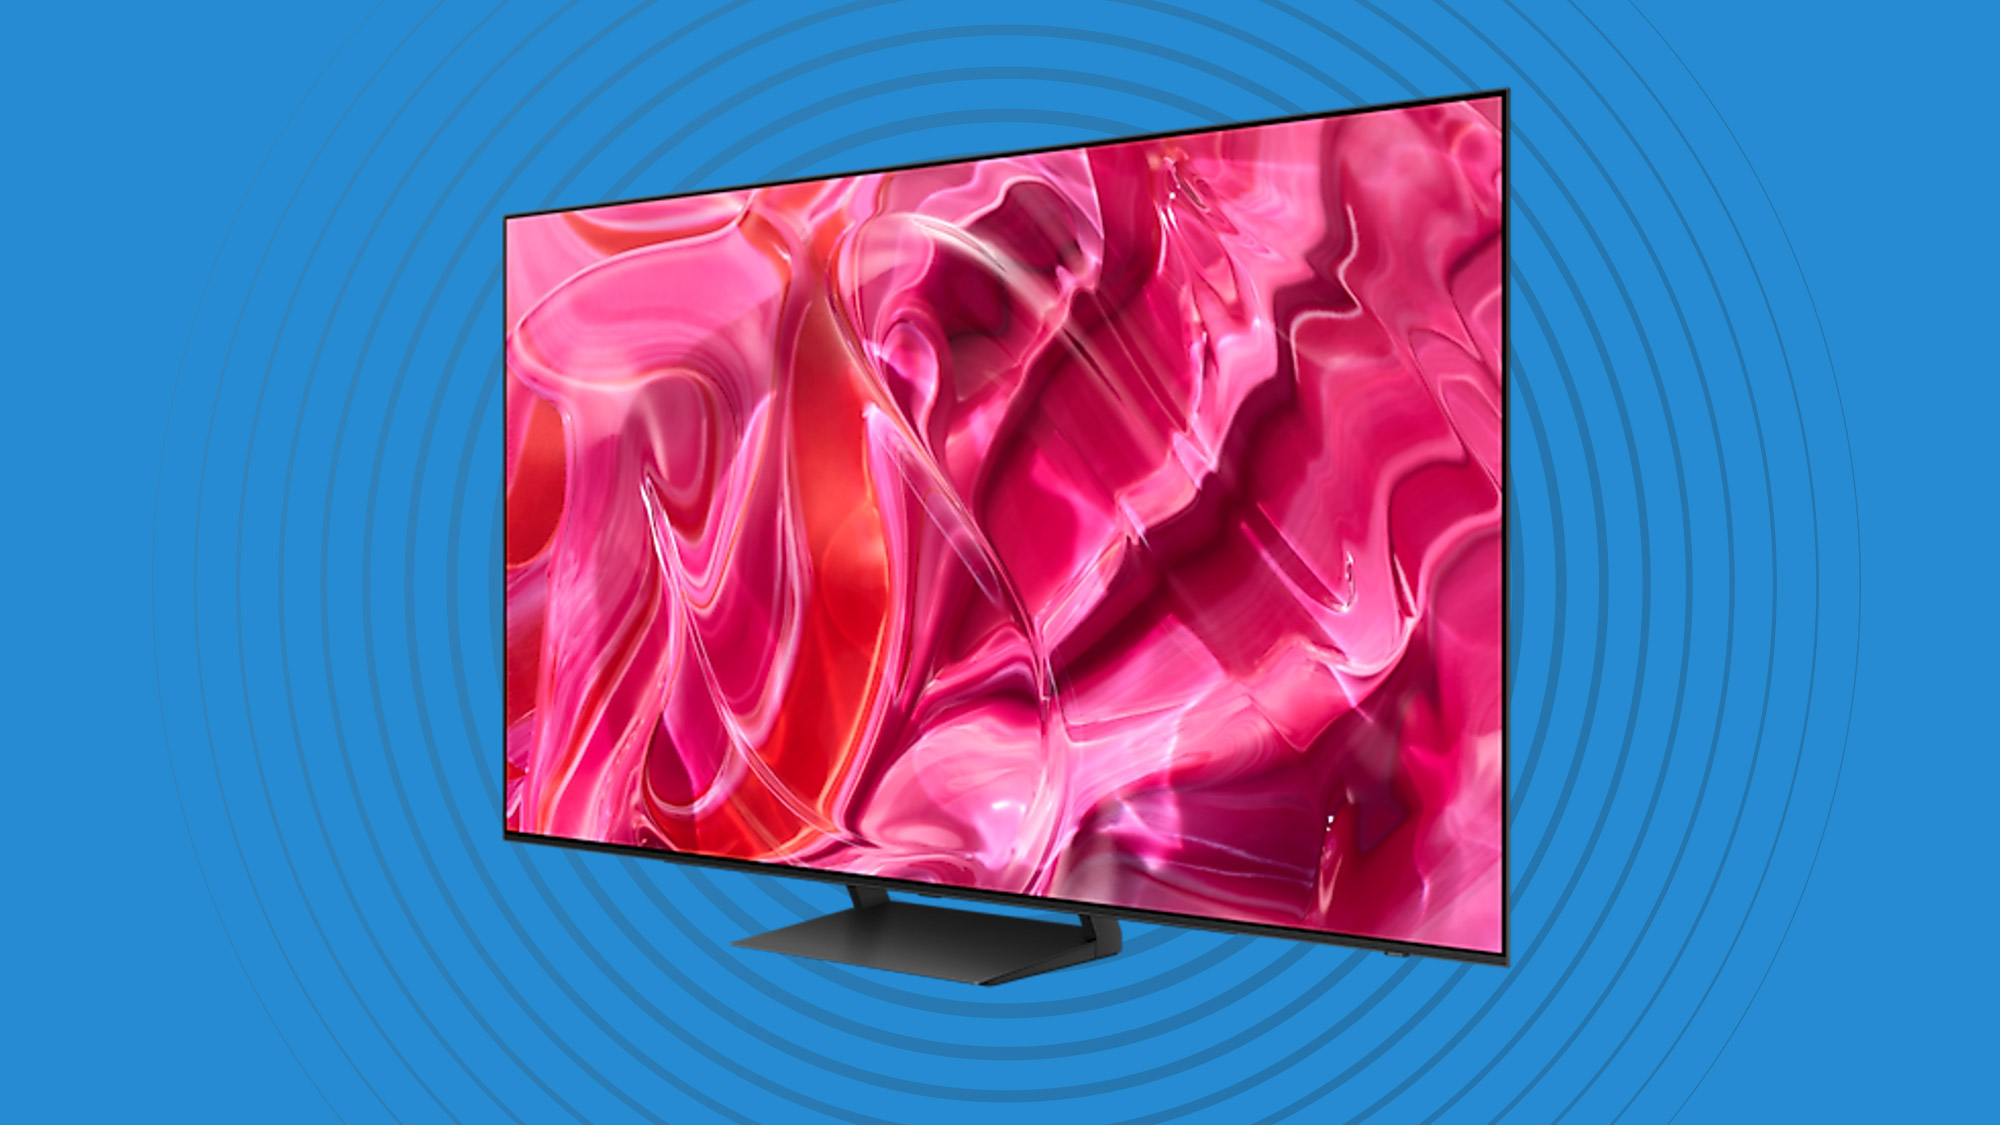 Get an OLED TV for as little as £799